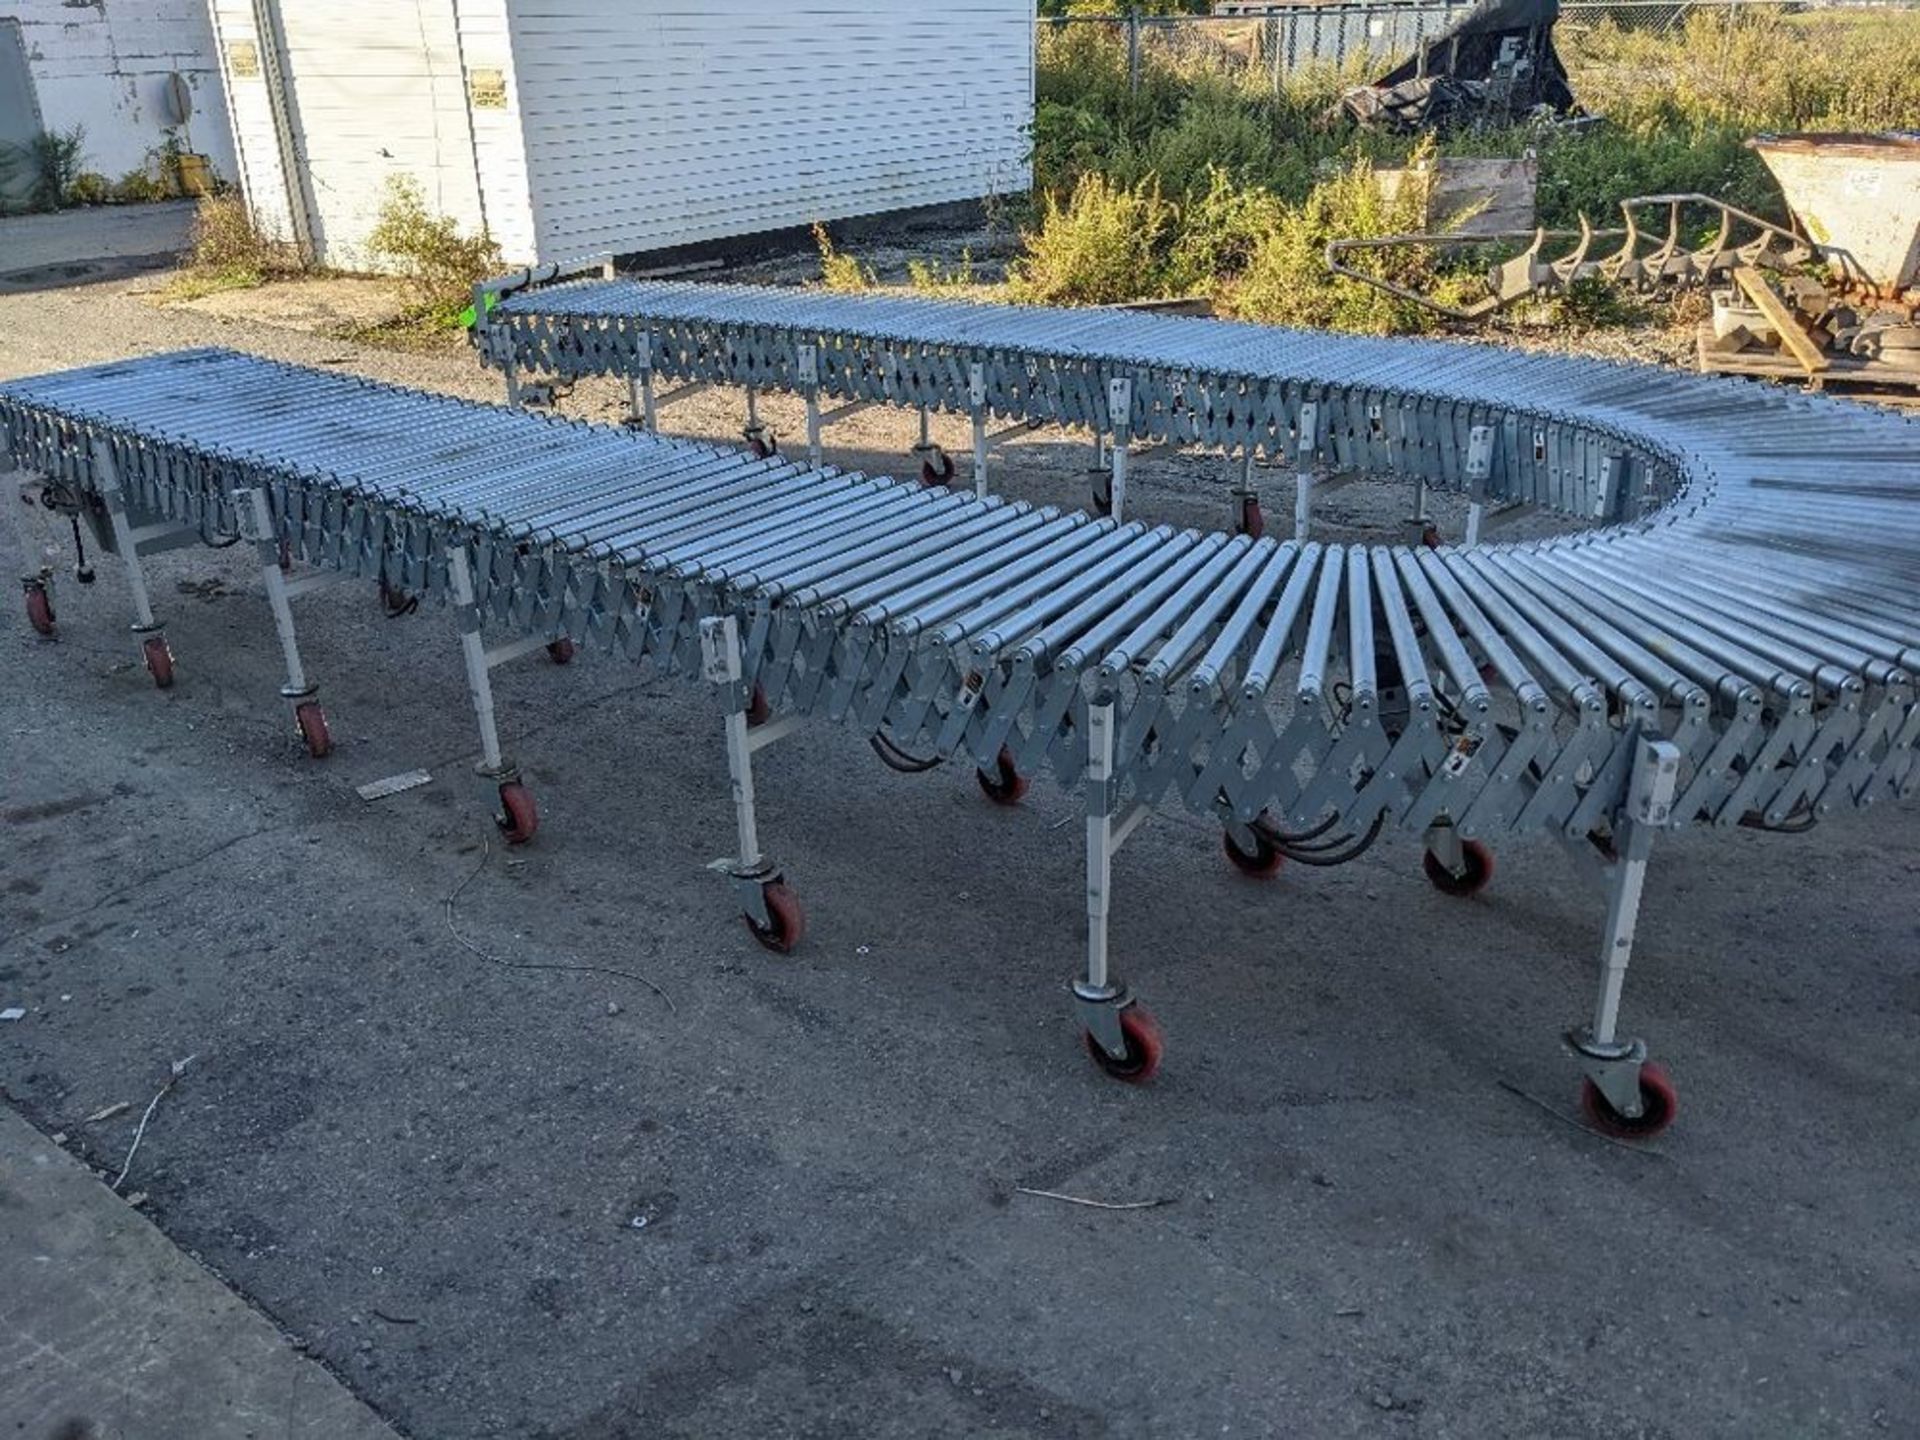 Qty (1) NestaFlex Flexible, Collapsible Powered Roller Conveyor - 1.4" dia. x 18 ga. Tube rollers - - Image 2 of 7